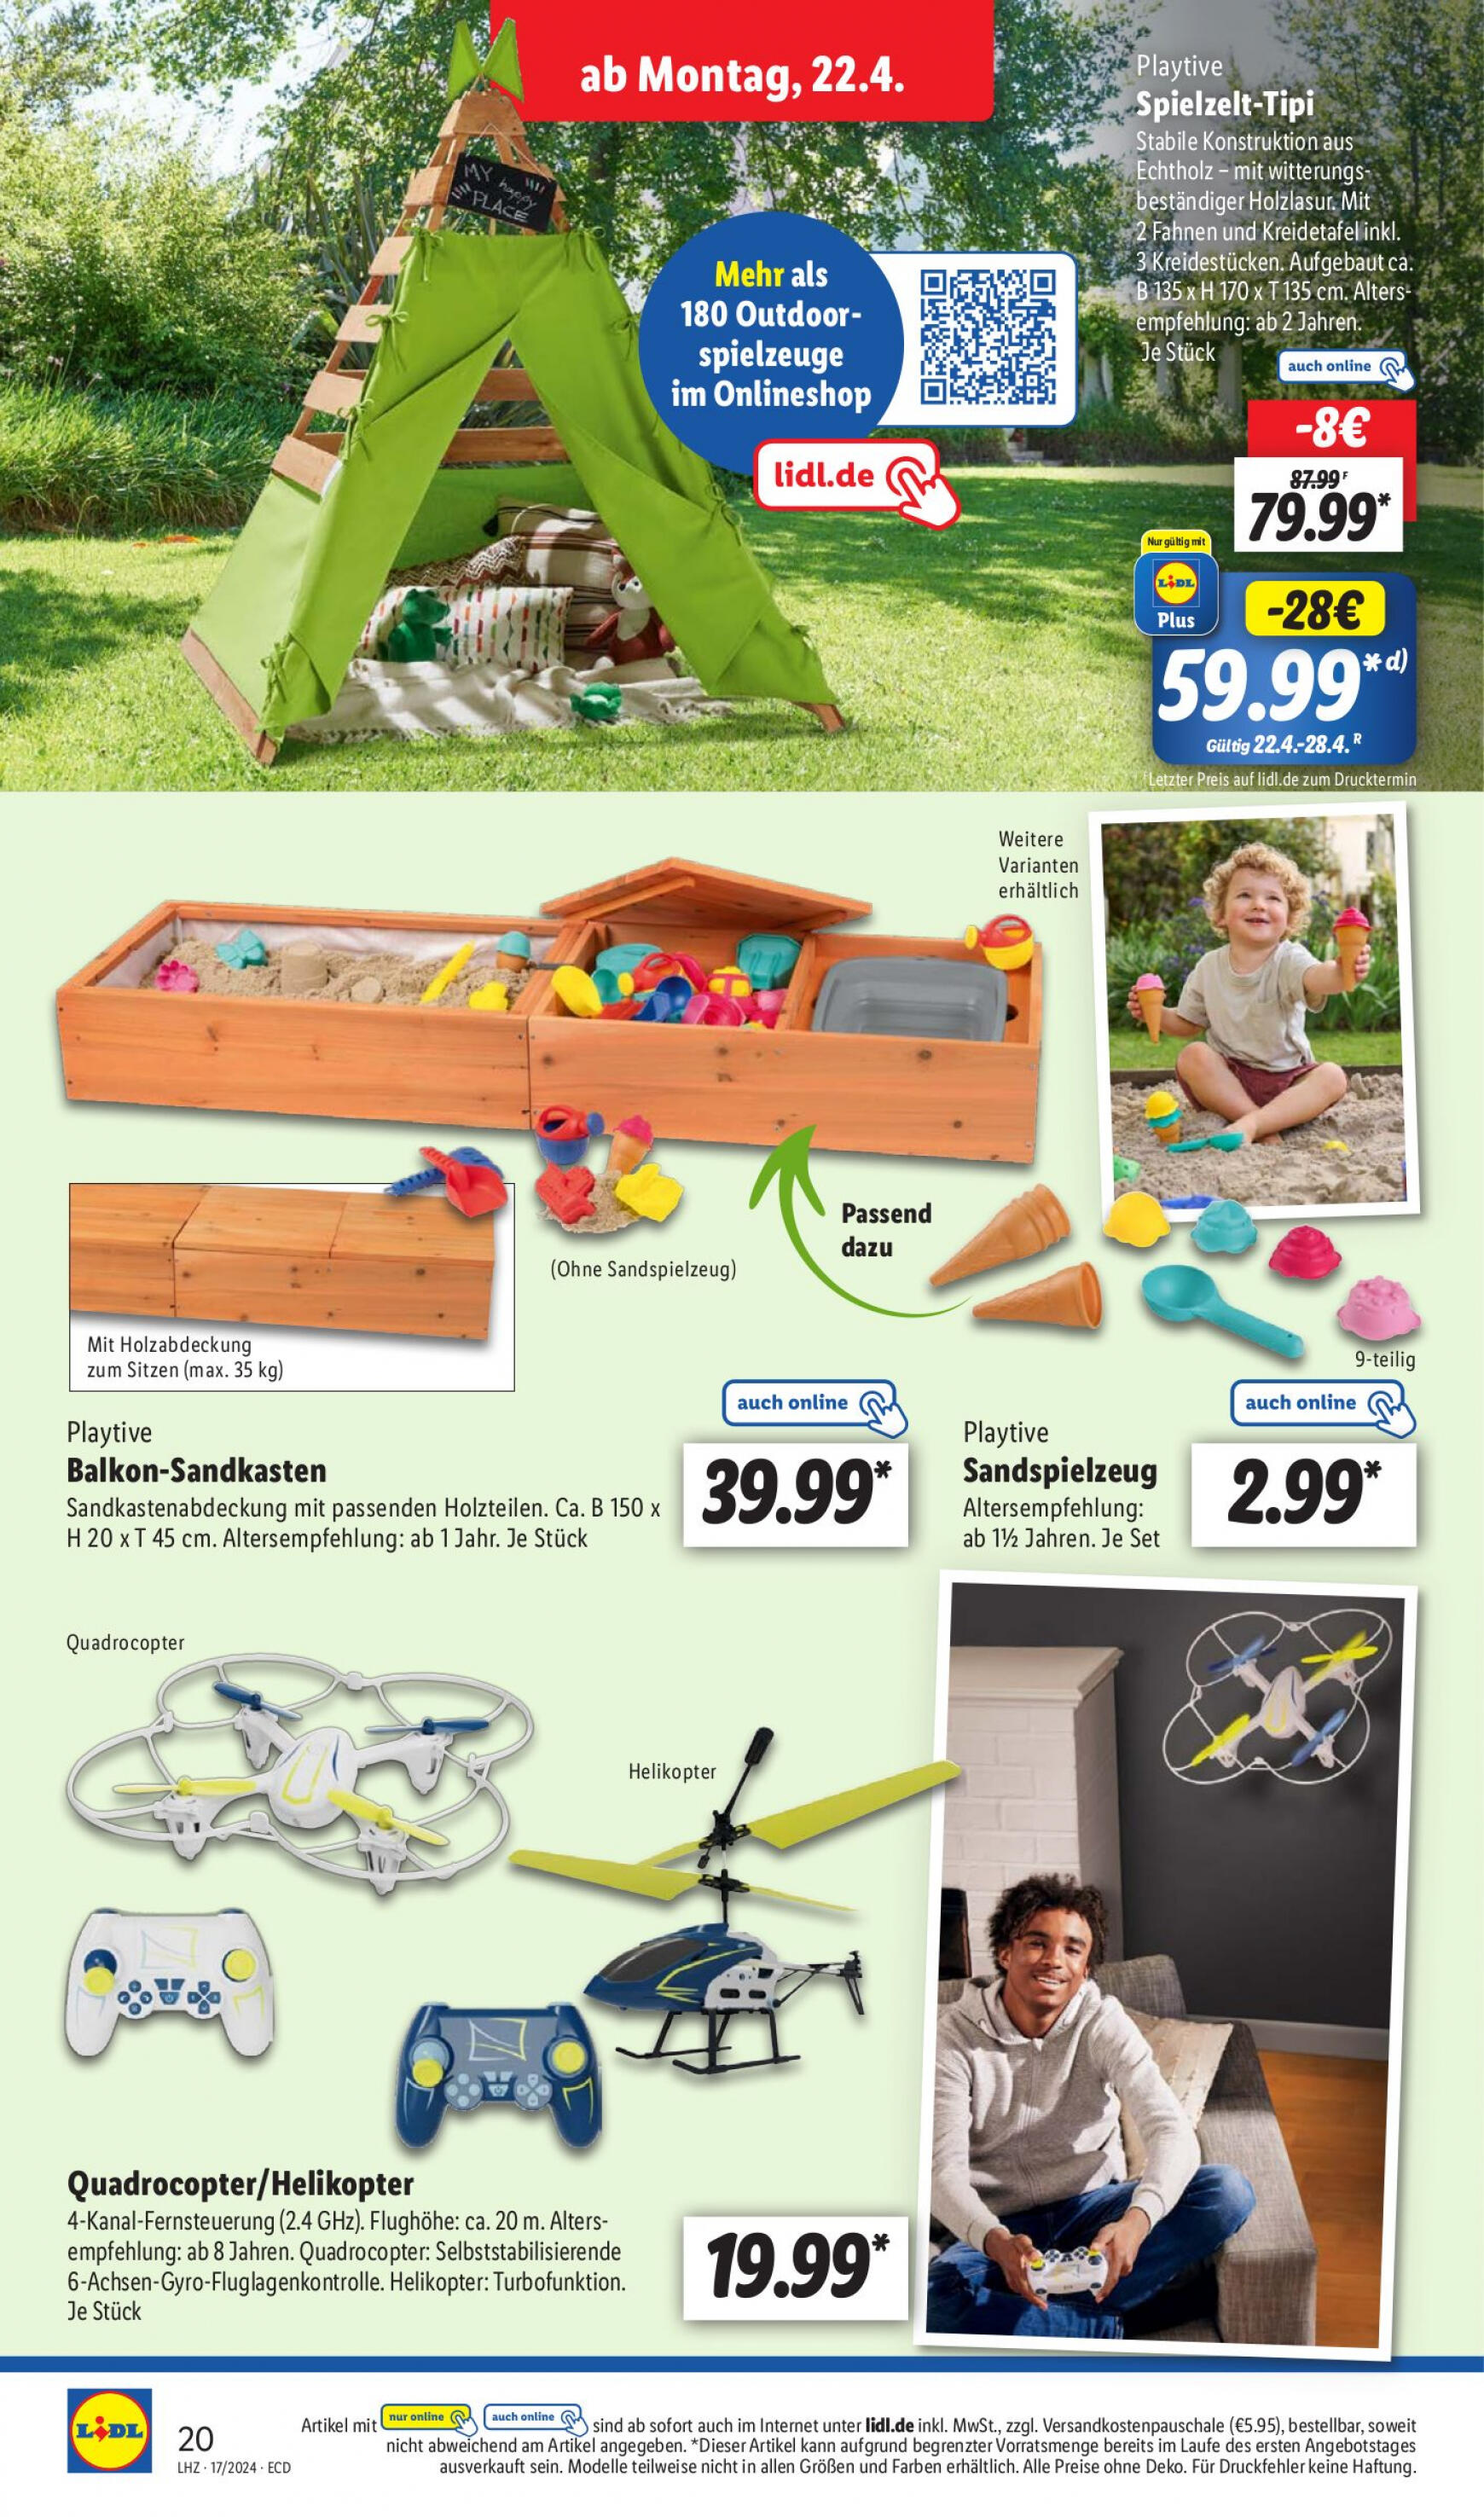 lidl - Flyer Lidl aktuell 22.04. - 27.04. - page: 24